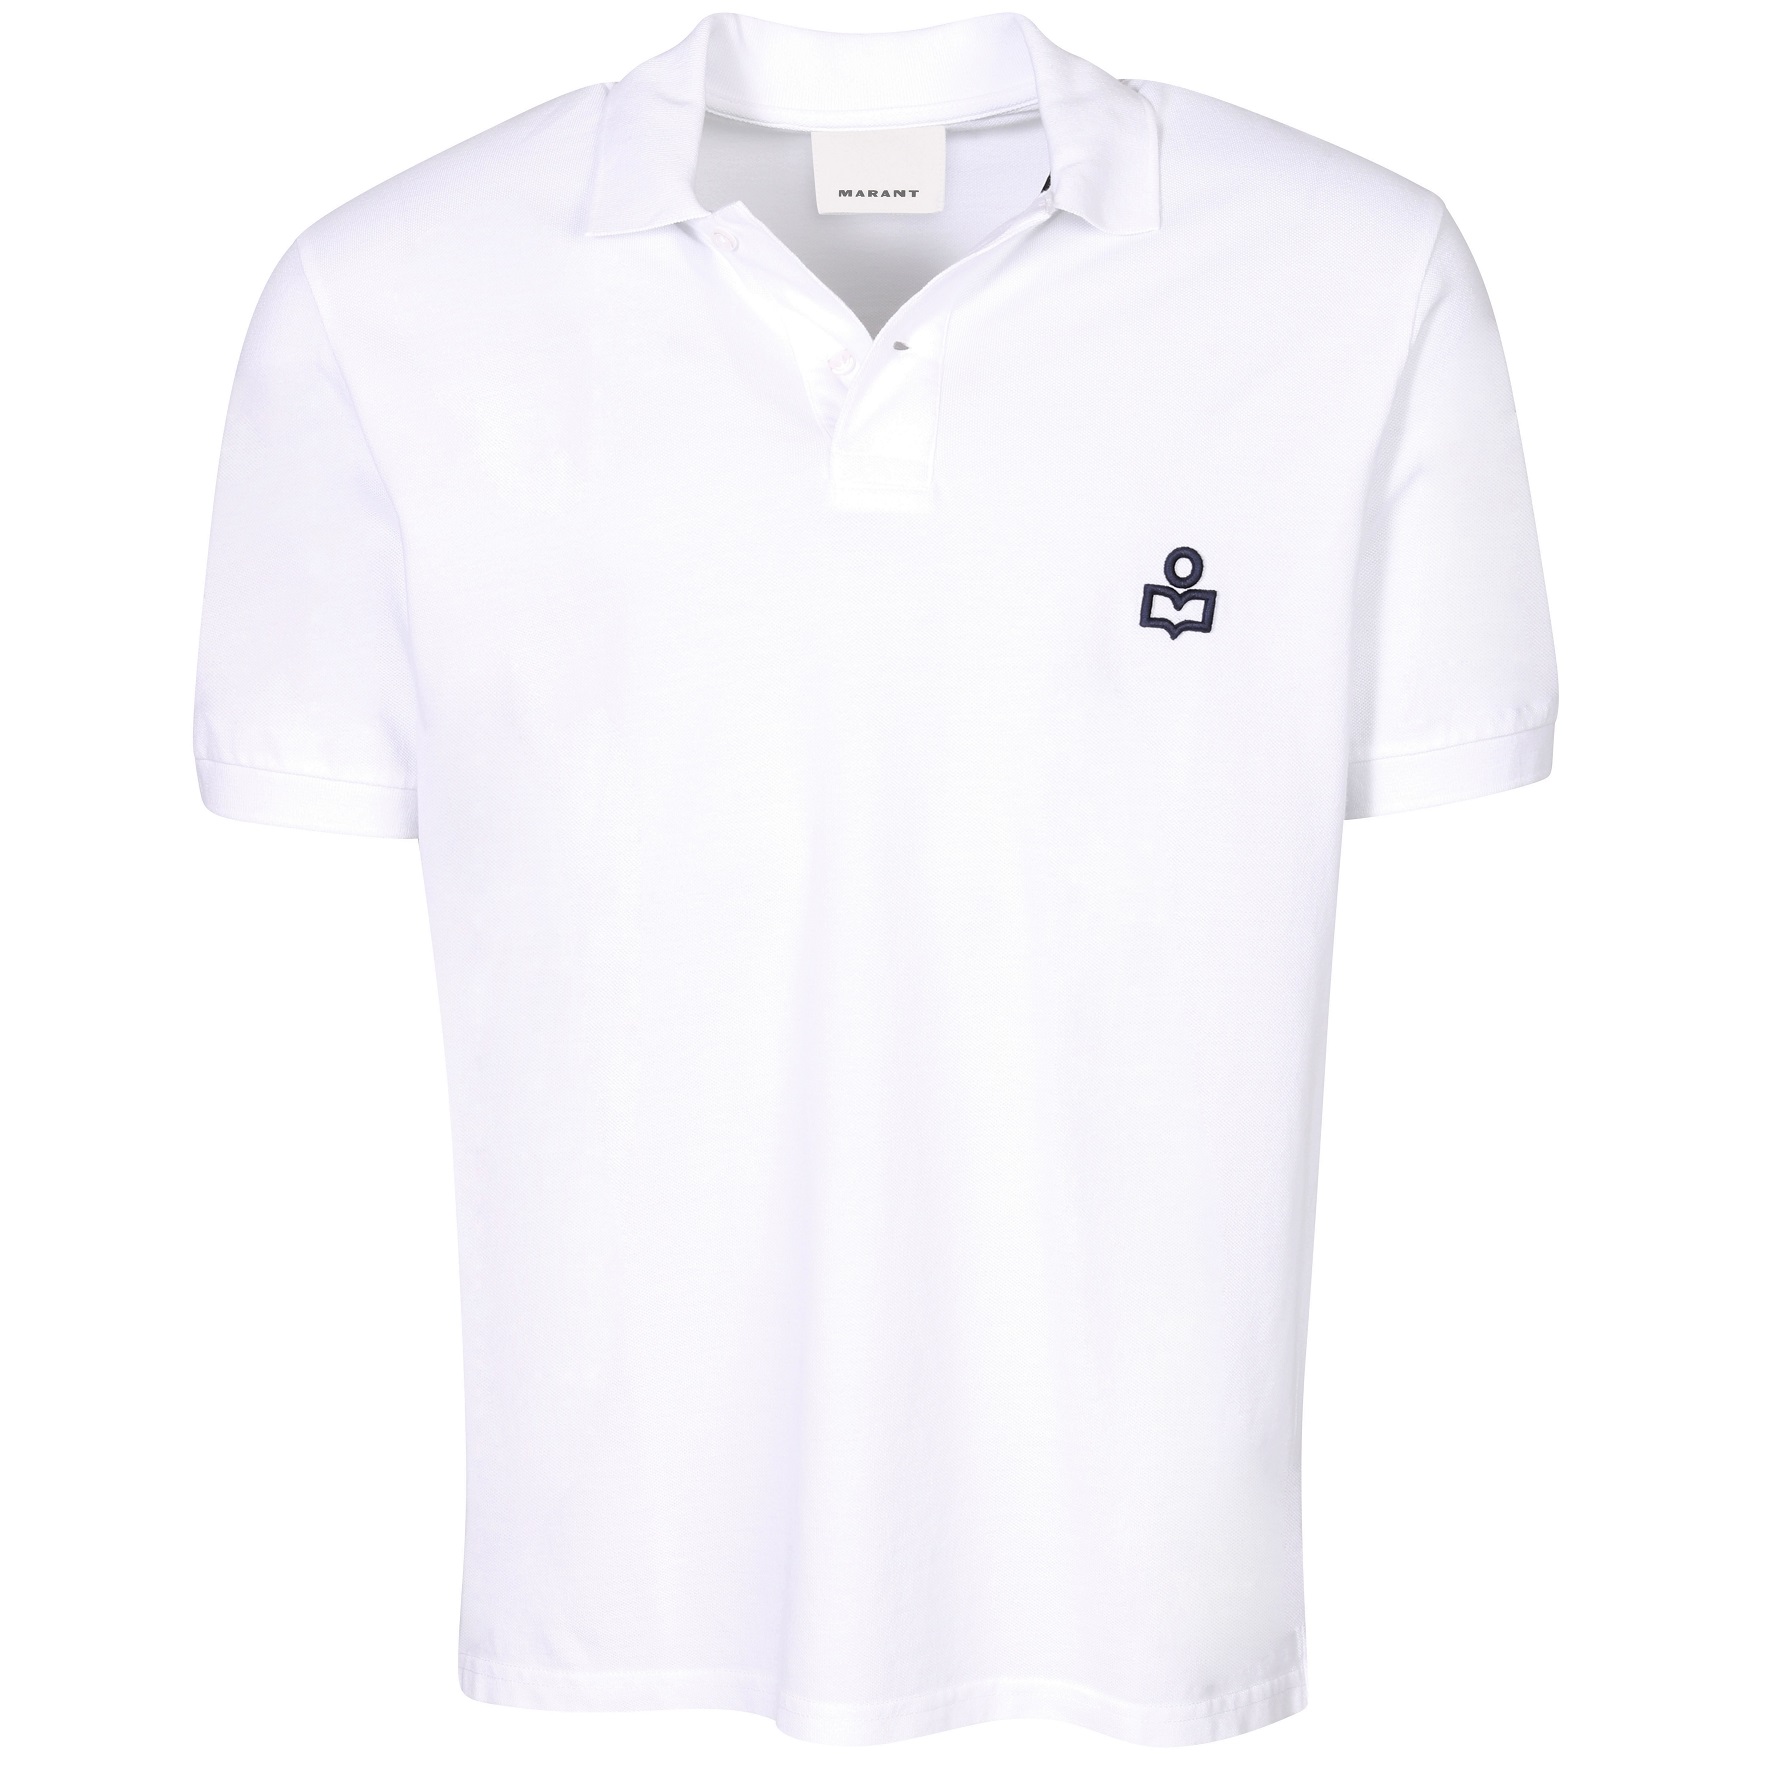 ISABEL MARANT Afko Polo Shirt in White/Navy S